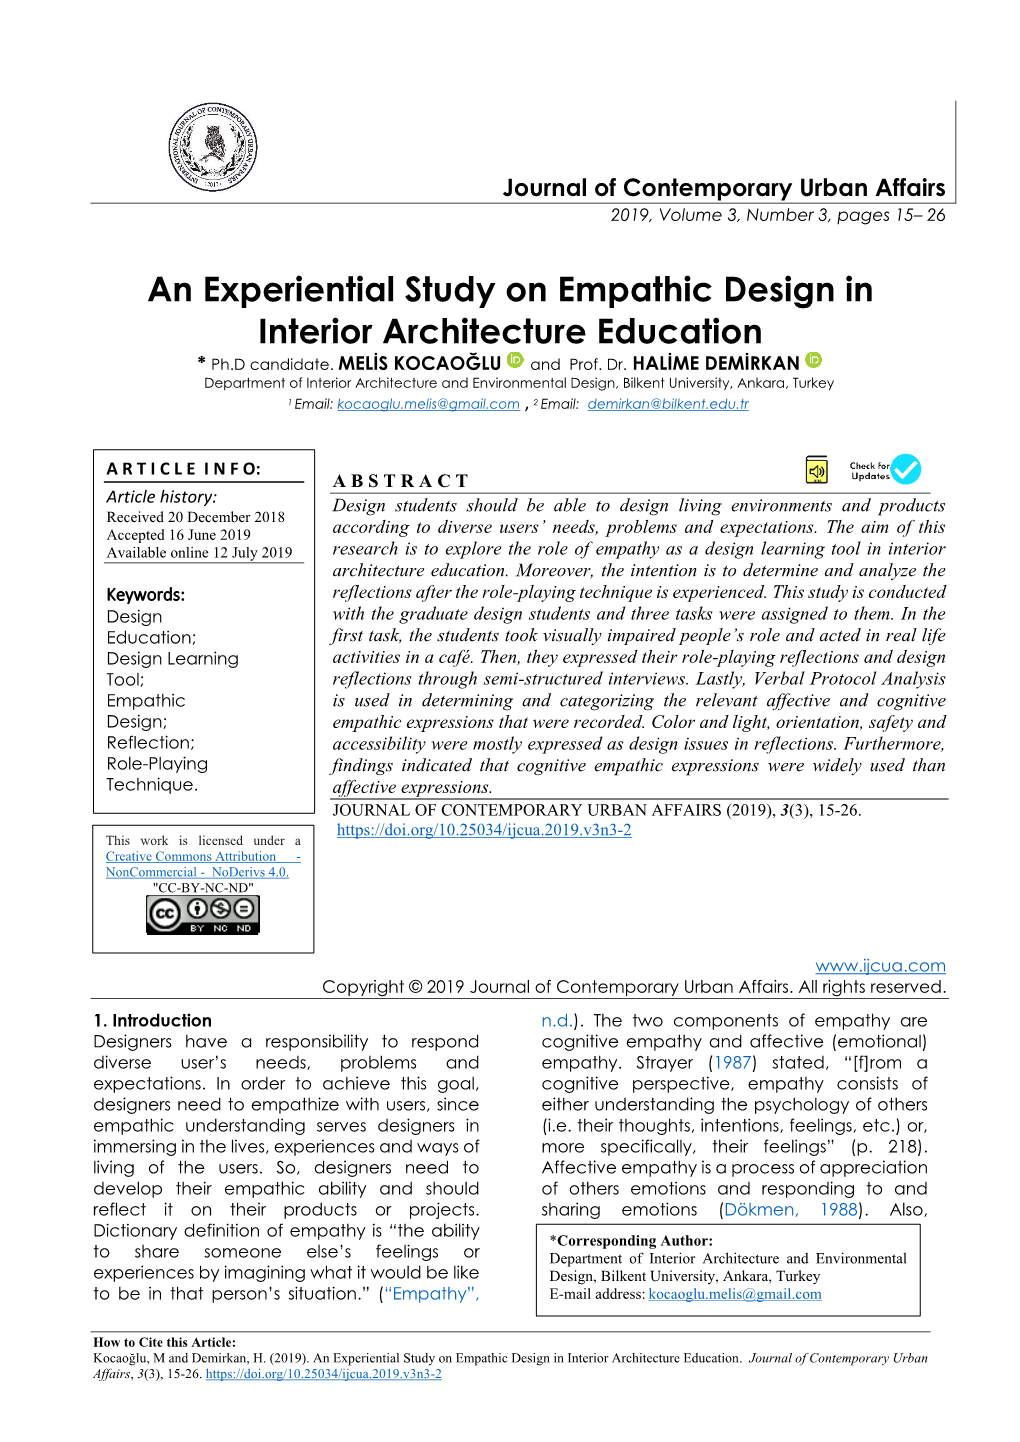 An Experiential Study on Empathic Design in Interior Architecture Education * Ph.D Candidate